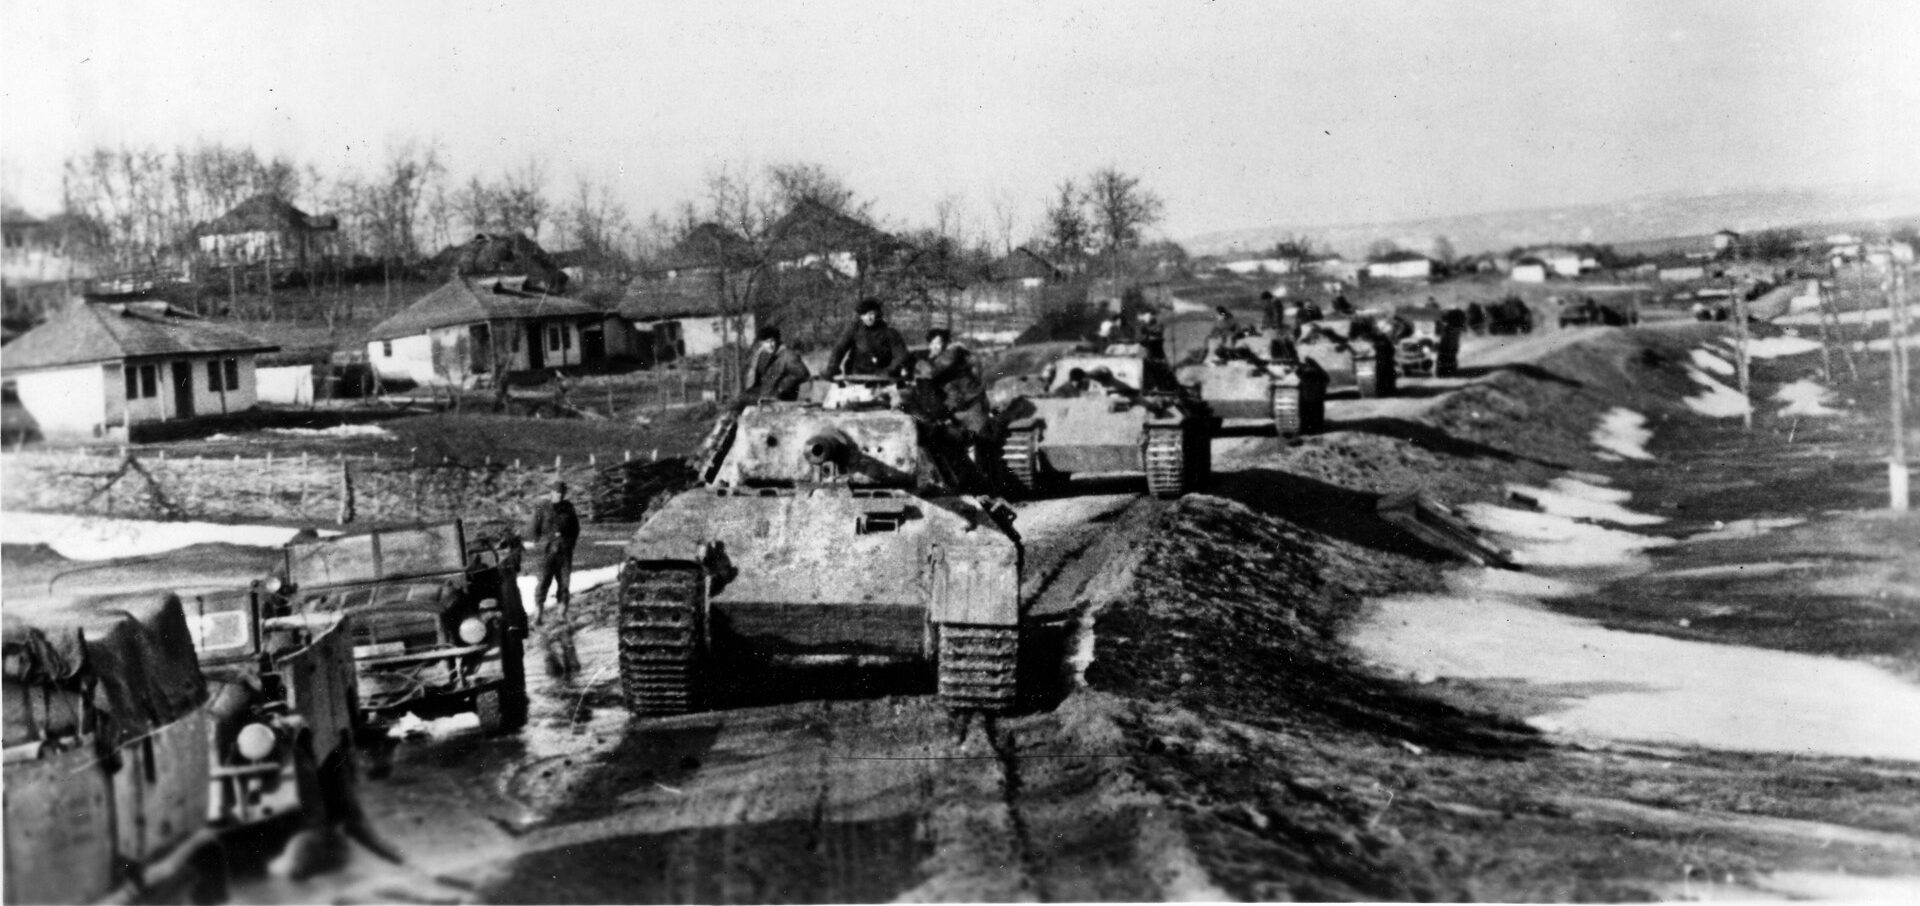 A column of Panzer V “Panther” tanks of the "Grossdeutschland" Panzer Division rolls across Romania near Jassy, spring 1944. The division’s armored regiment, which was one of Germany’s finest remaining combat formations, distinguished itself in the early days of the fighting, and fought tenaciously against often overwhelming Soviet strength.  Keeping control of Romania’s oil fields was essential to Hitler. 